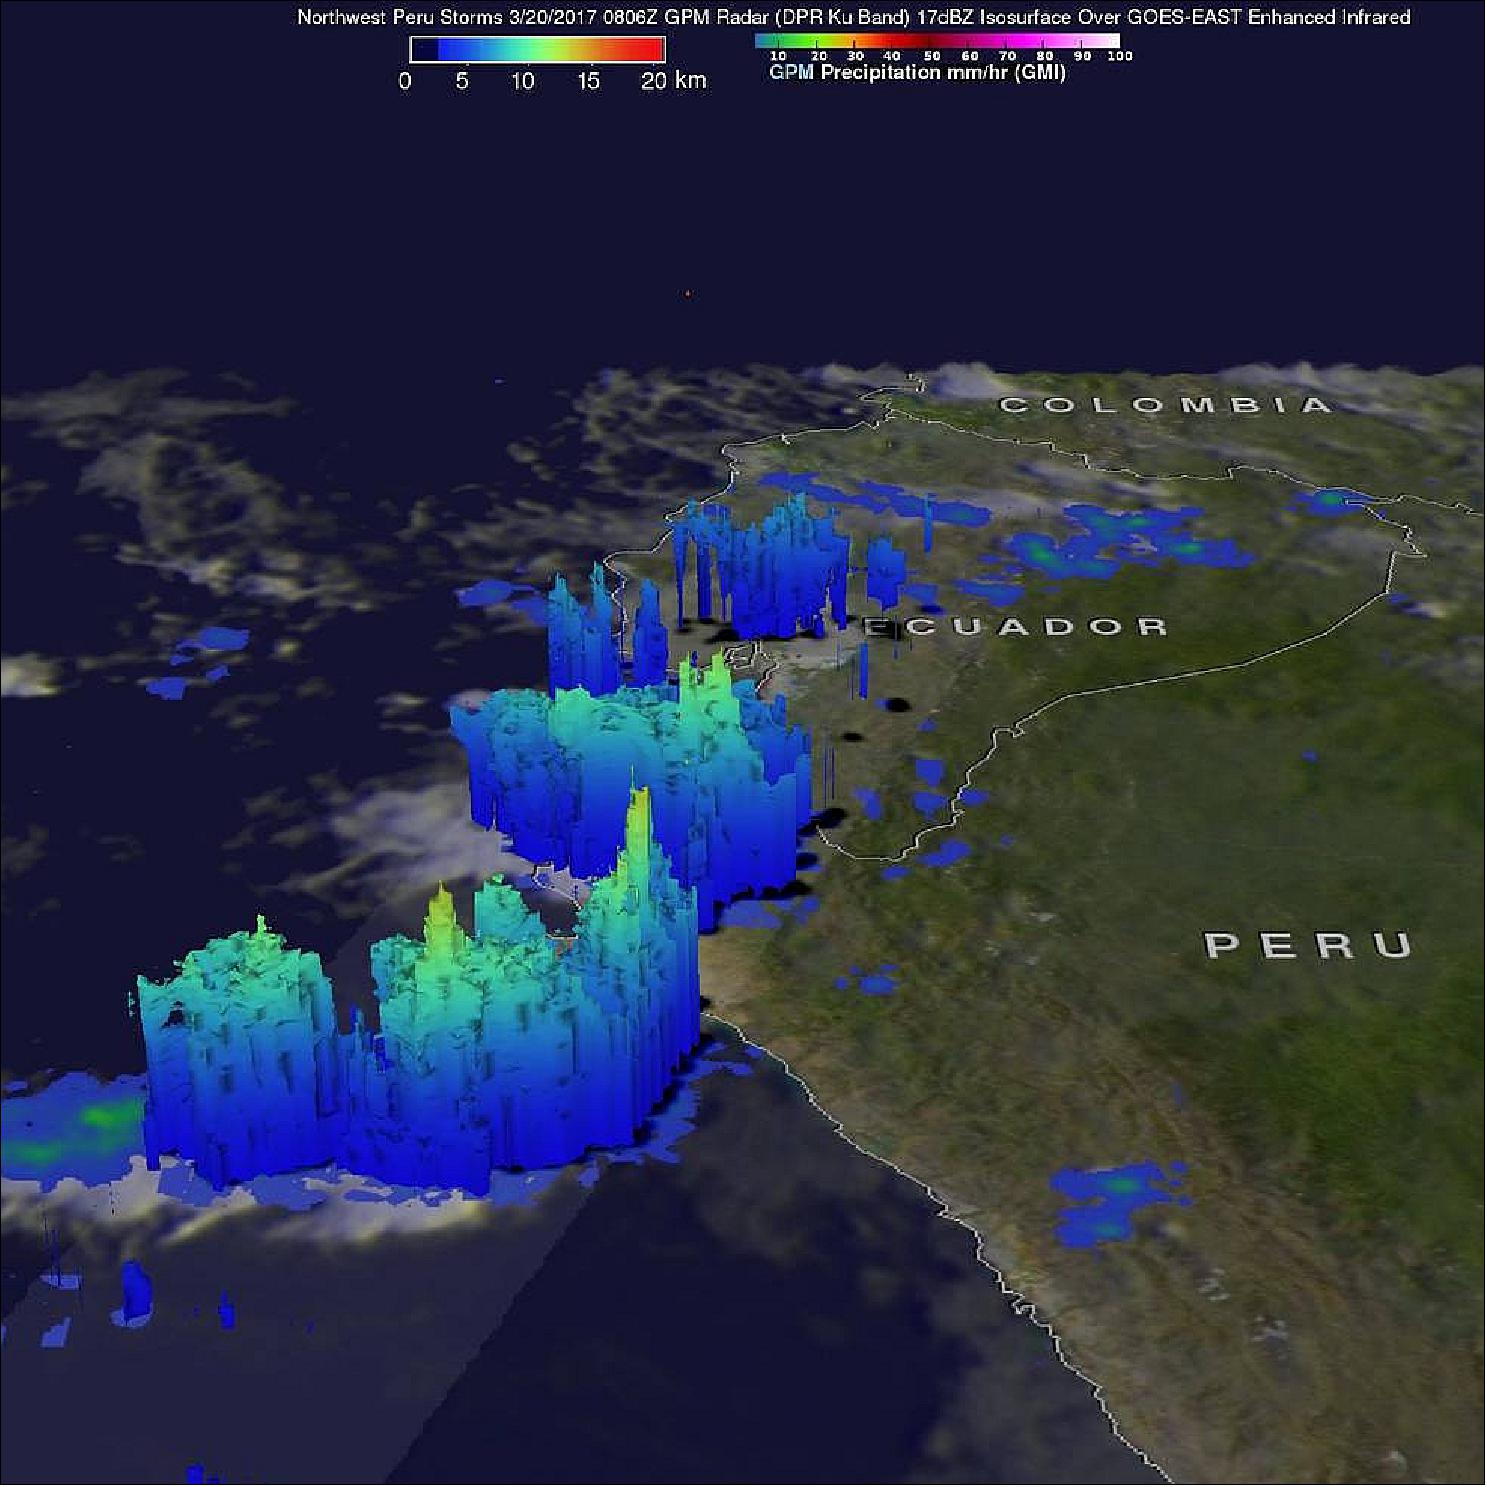 Figure 47: When the GPM core observatory satellite flew above Peru on March 20, 2017 at 0826 UTC, GPM identified locations of storms that were dropping heavy rainfall over northwestern Peru (image credit: NASA/JAXA, Hal Pierce)